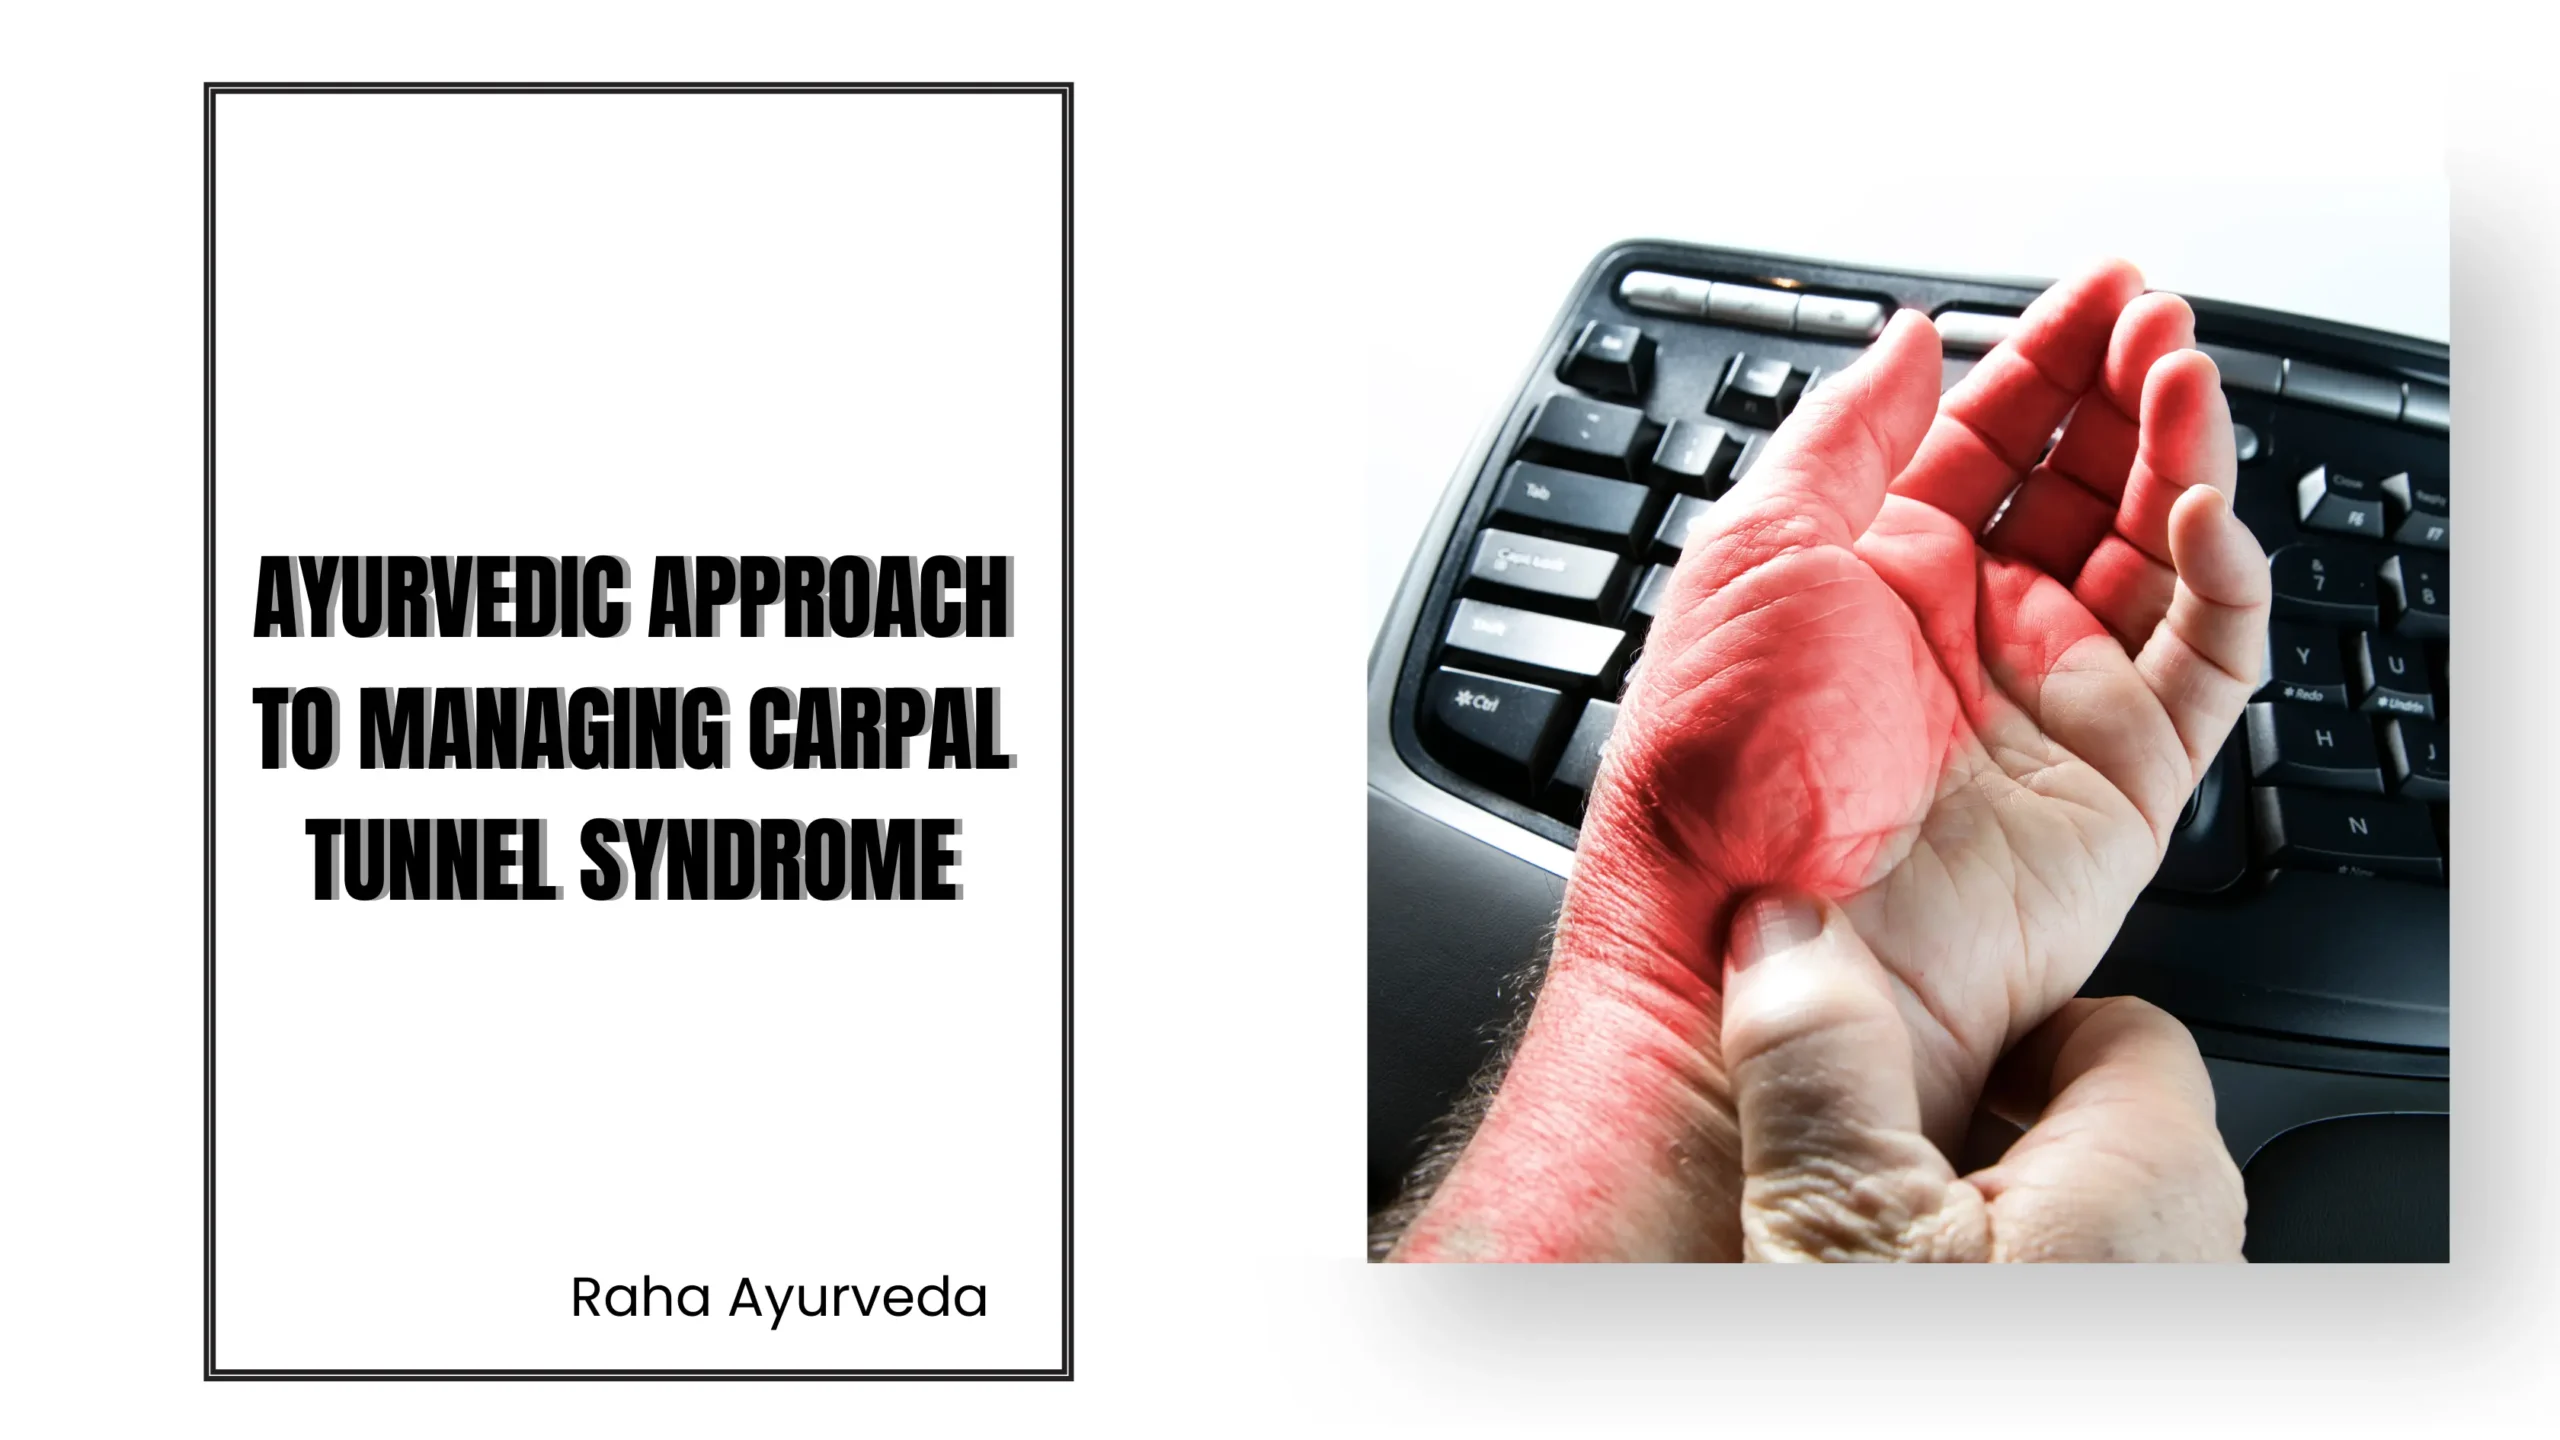 Ayurvedic Approach to Managing Carpal Tunnel Syndrome